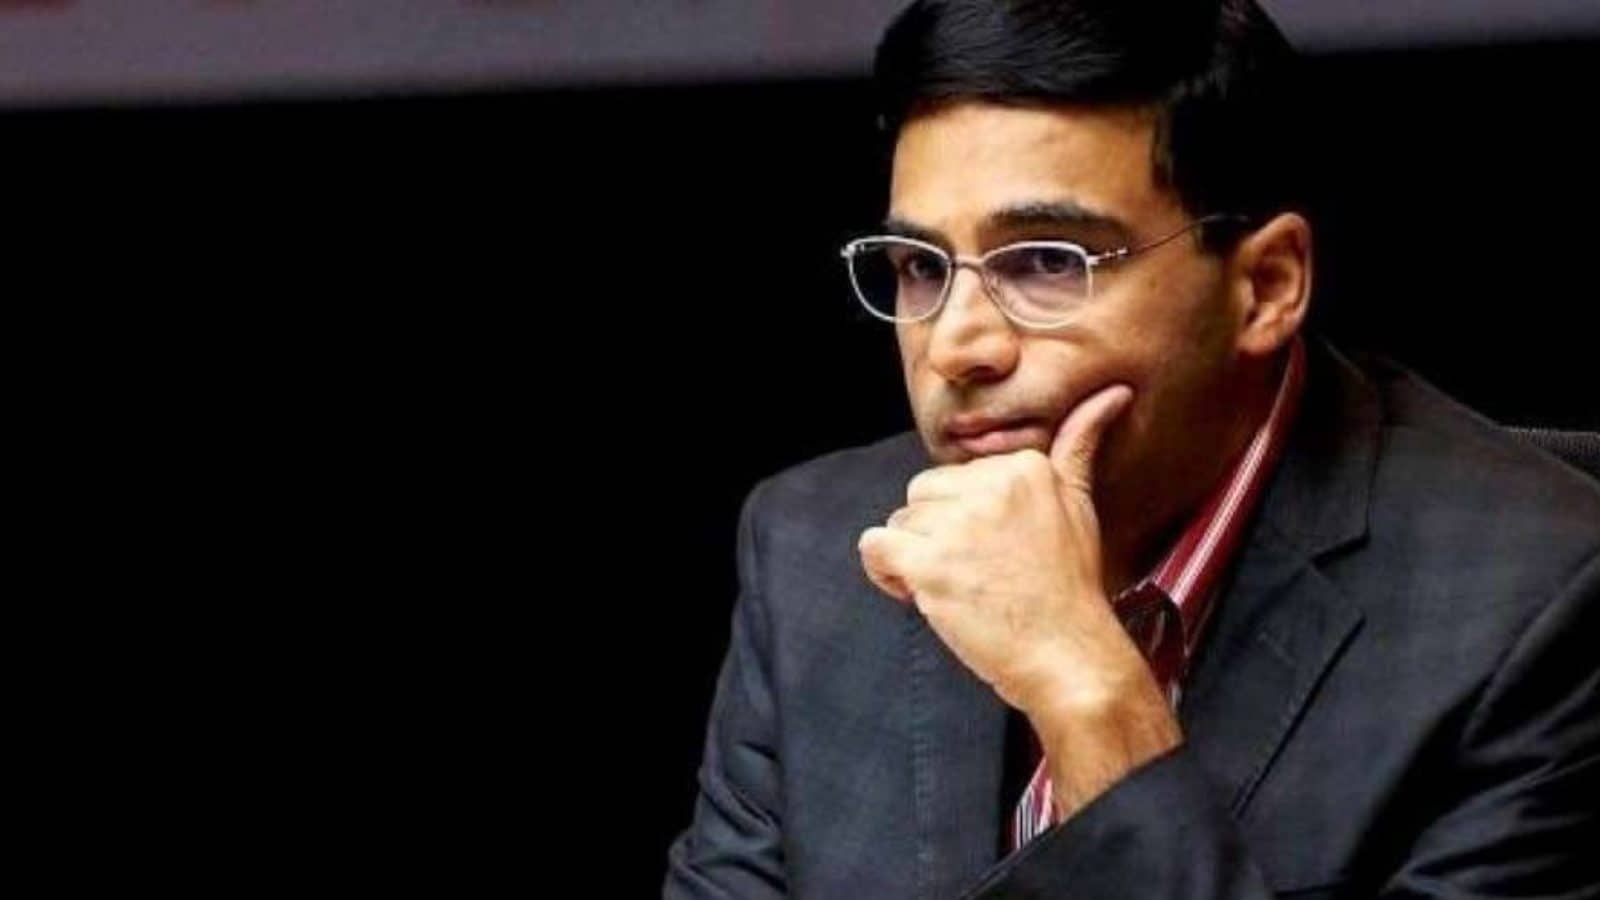 Dreams don't need a dose of reality, but planning does: Viswanathan Anand